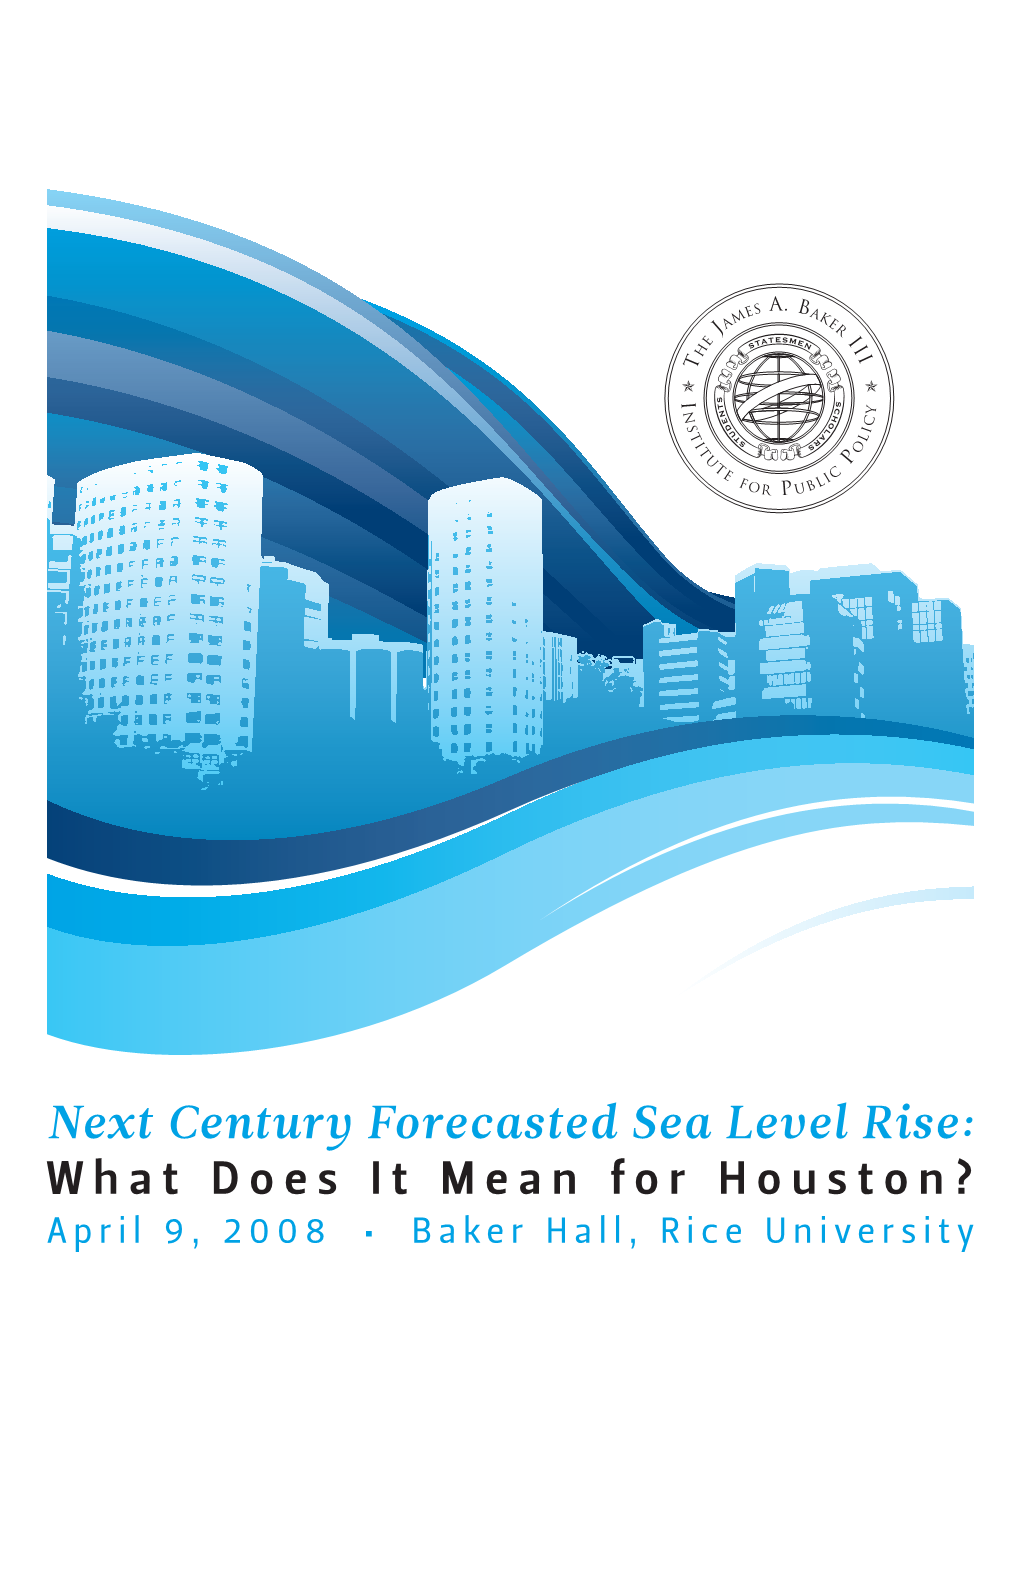 Next Century Forecasted Sea Level Rise: What Does It Mean for Houston? April 9, 2008 • Baker Hall, Rice University About the Event